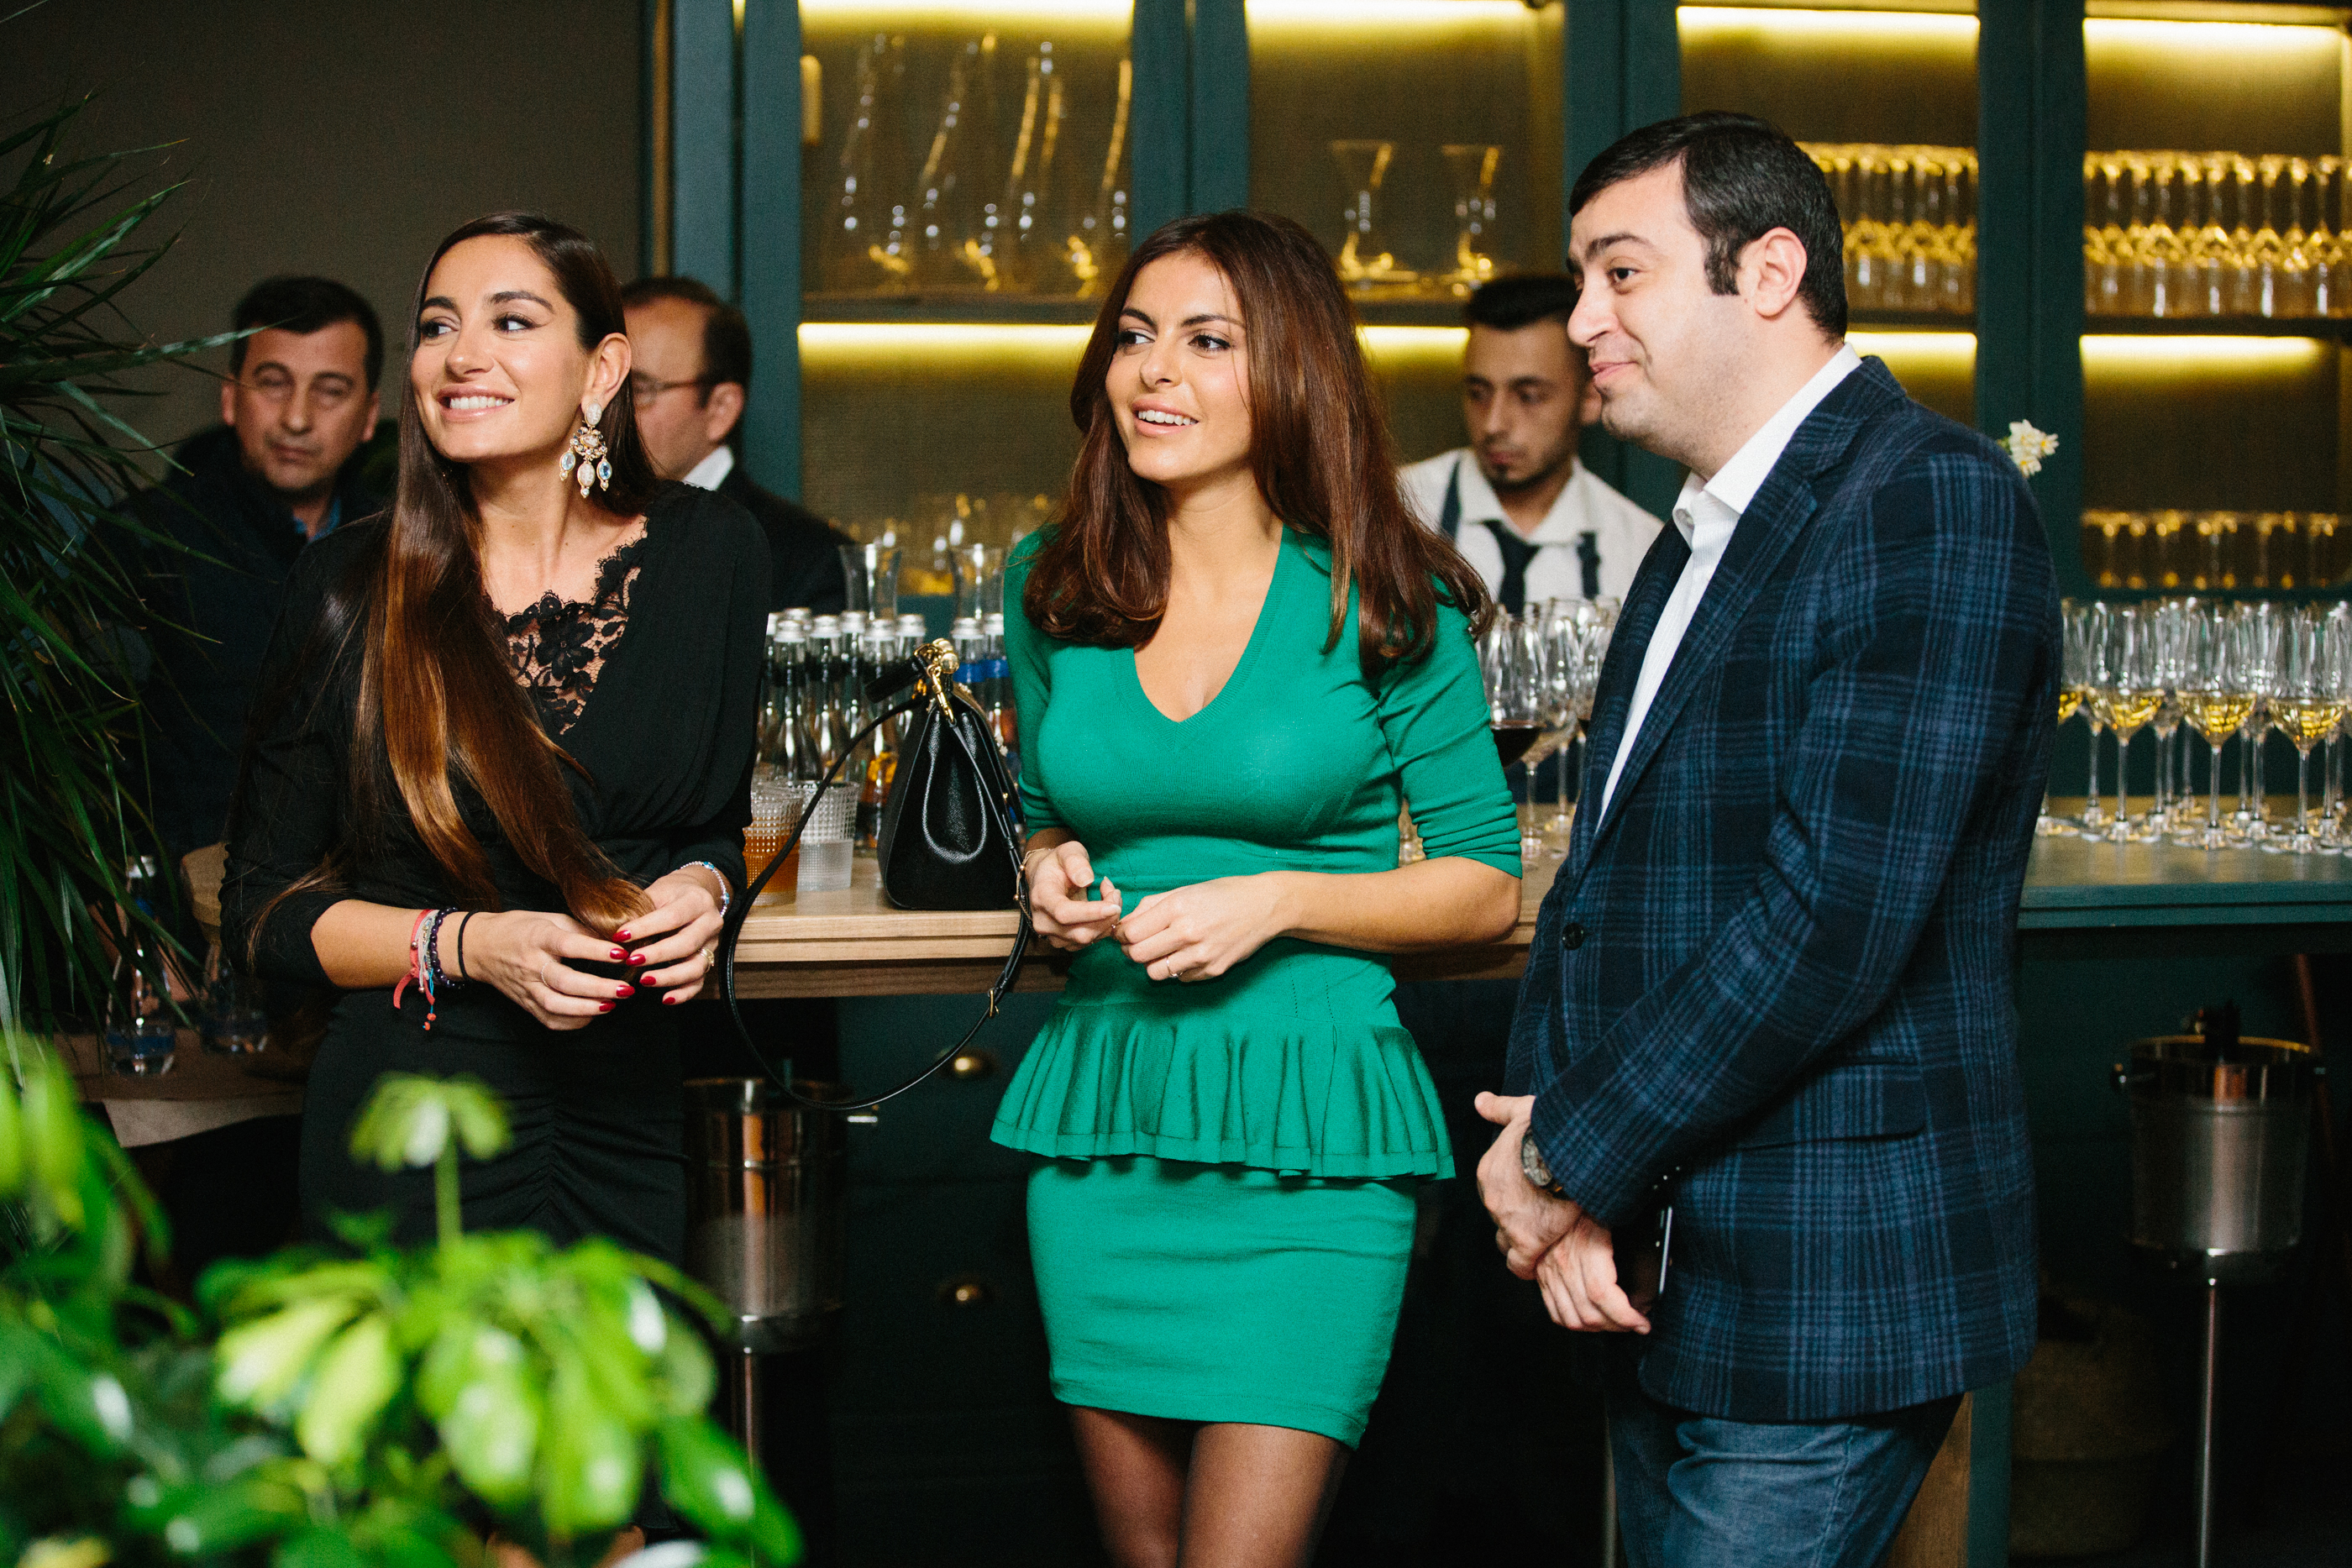 Guests attend the Chayki Restaurant opening in Baku 